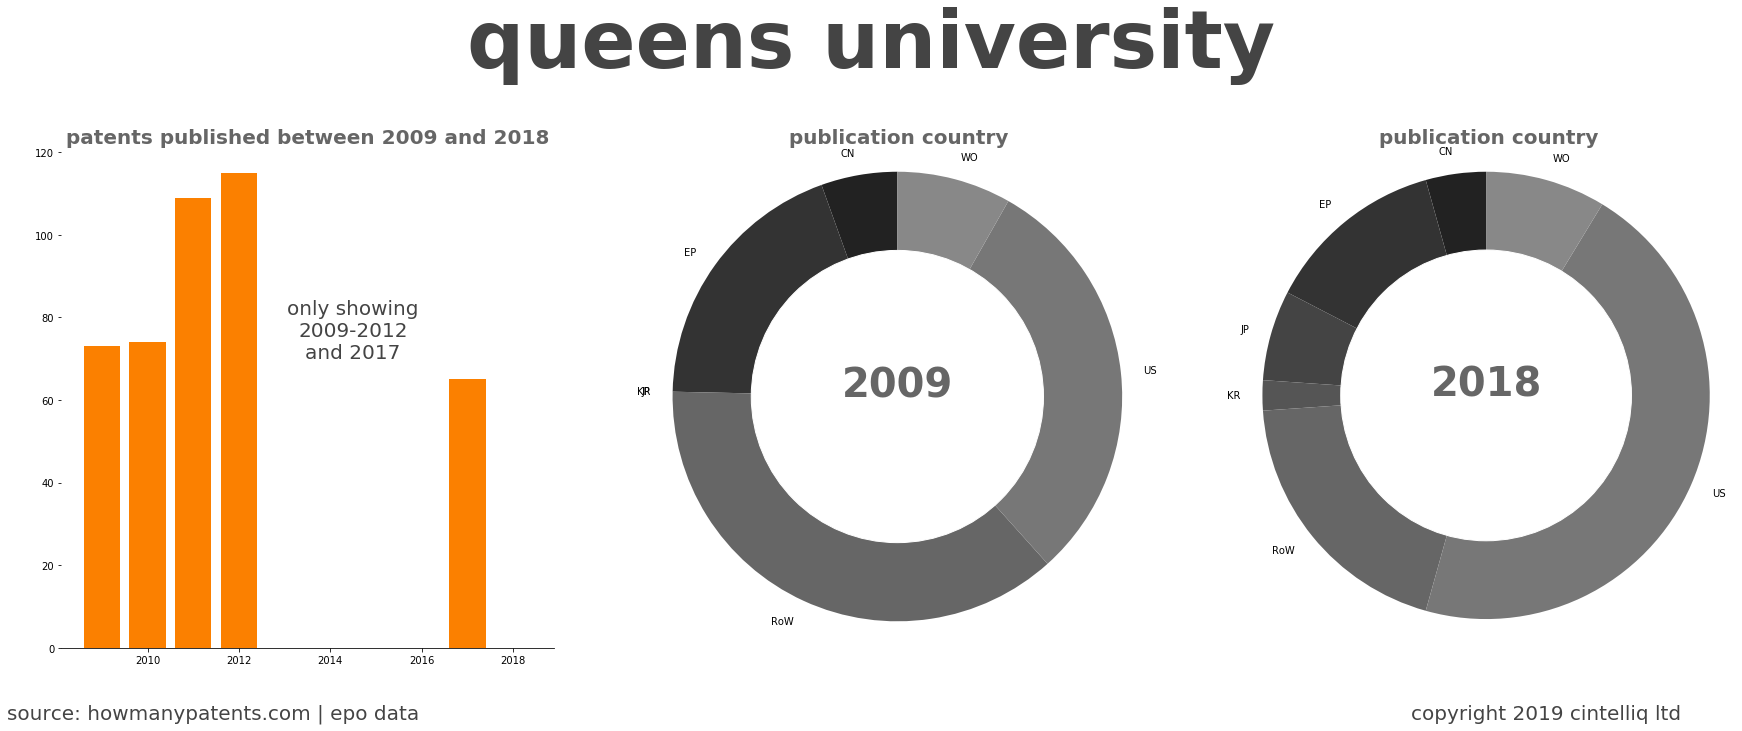 summary of patents for Queens University